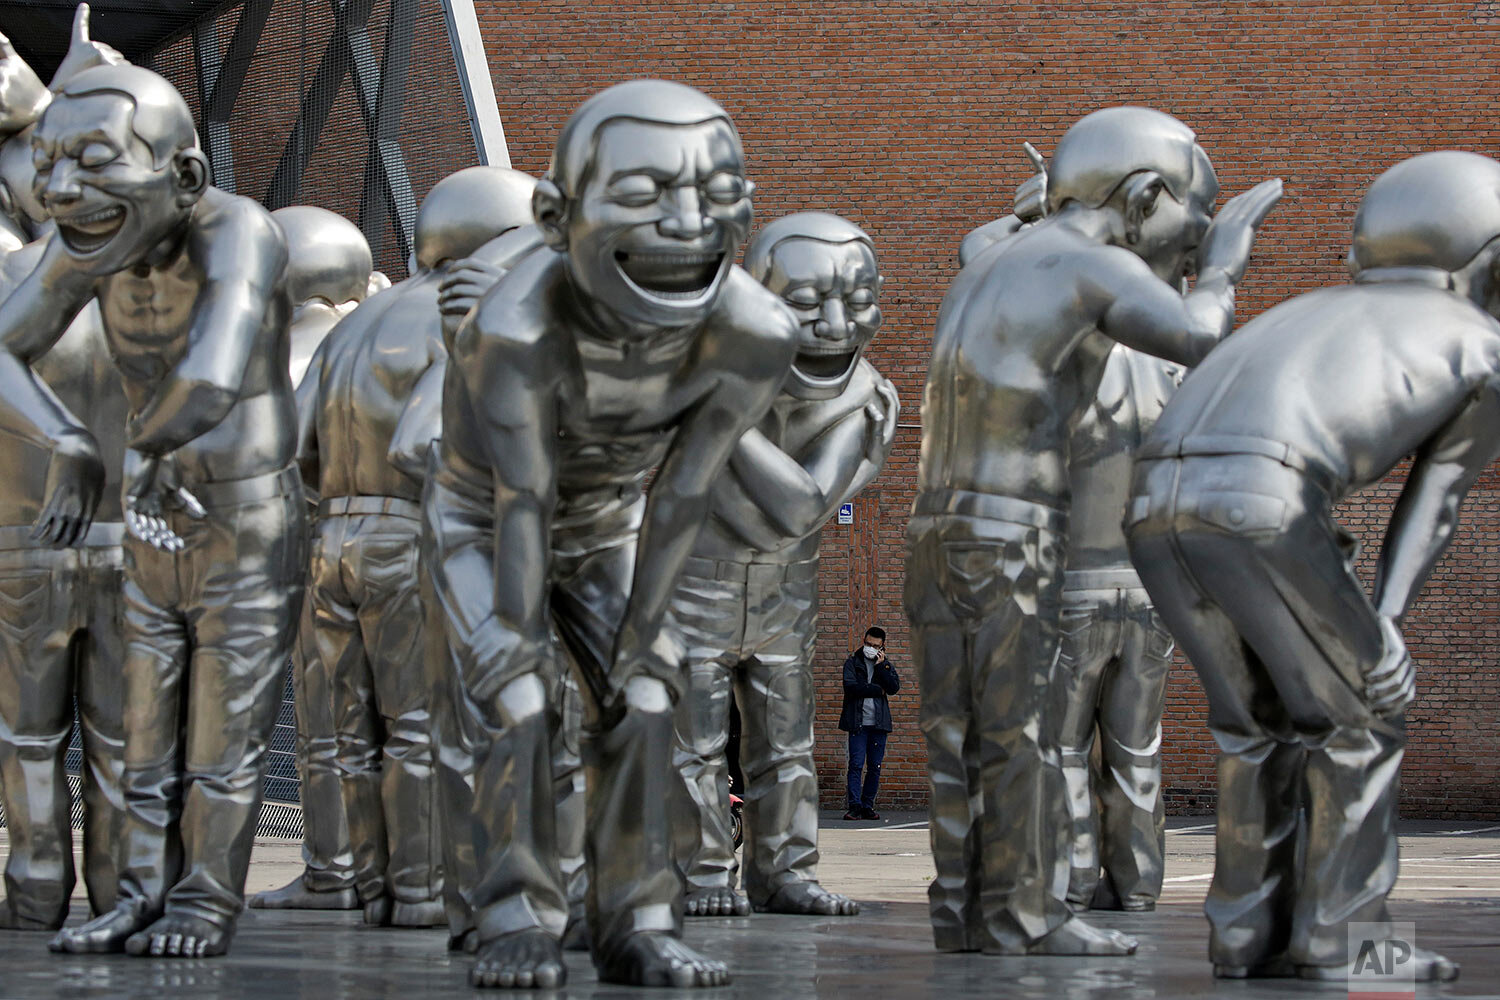  A man wearing a protective face mask to help curb the spread of the new coronavirus talks on his phone near the human sculptures on display outside an art gallery in Beijing, Tuesday, April 28, 2020. (AP Photo/Andy Wong) 